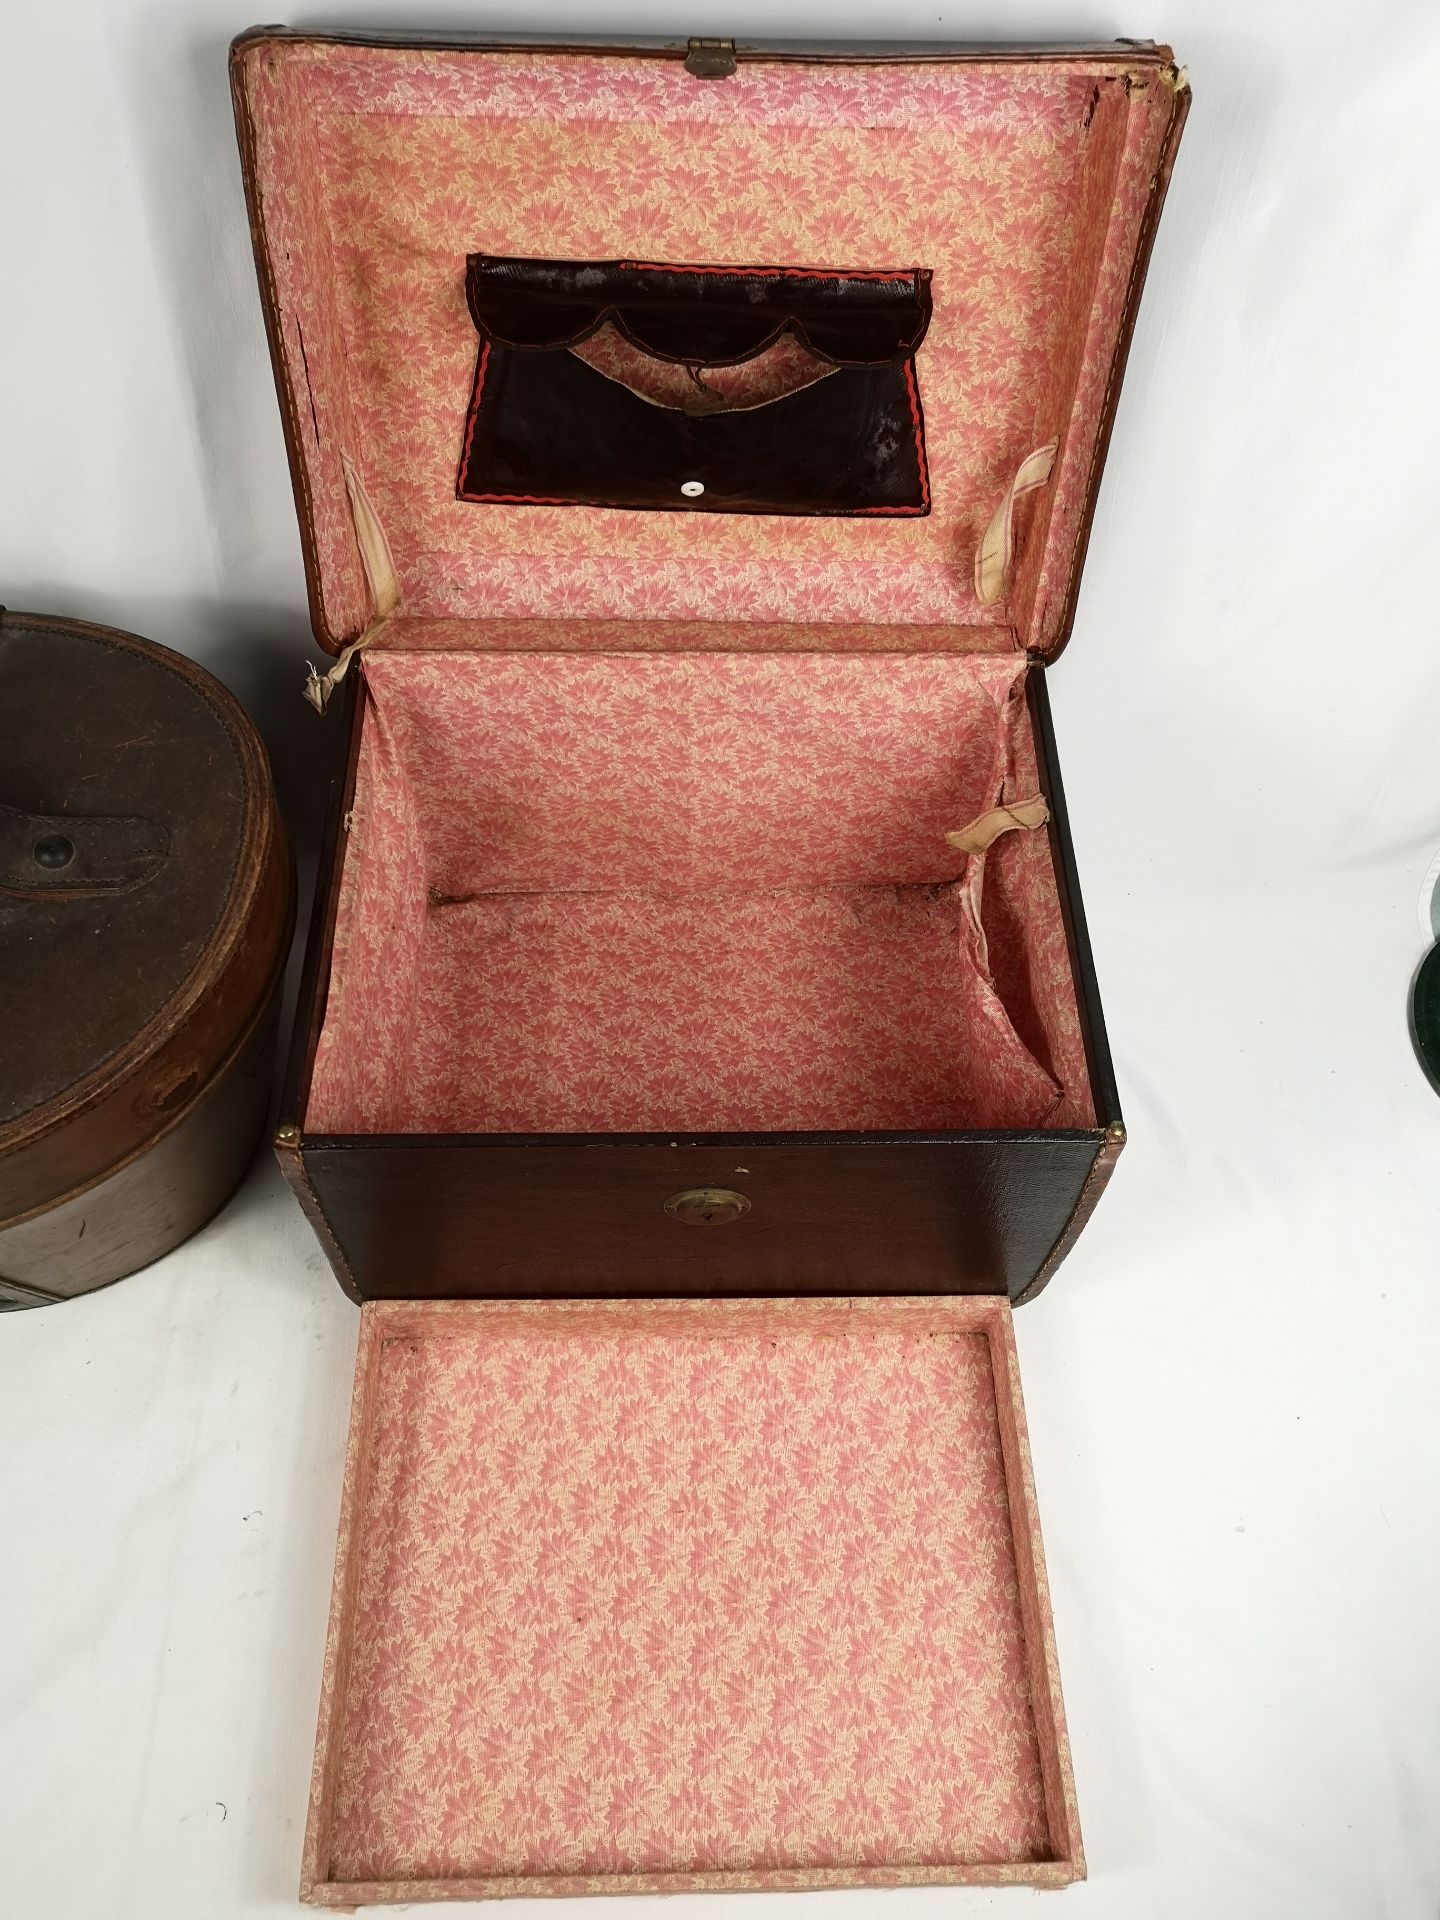 Woodrow top hat in leather box together with a canvas hat box - Image 2 of 5